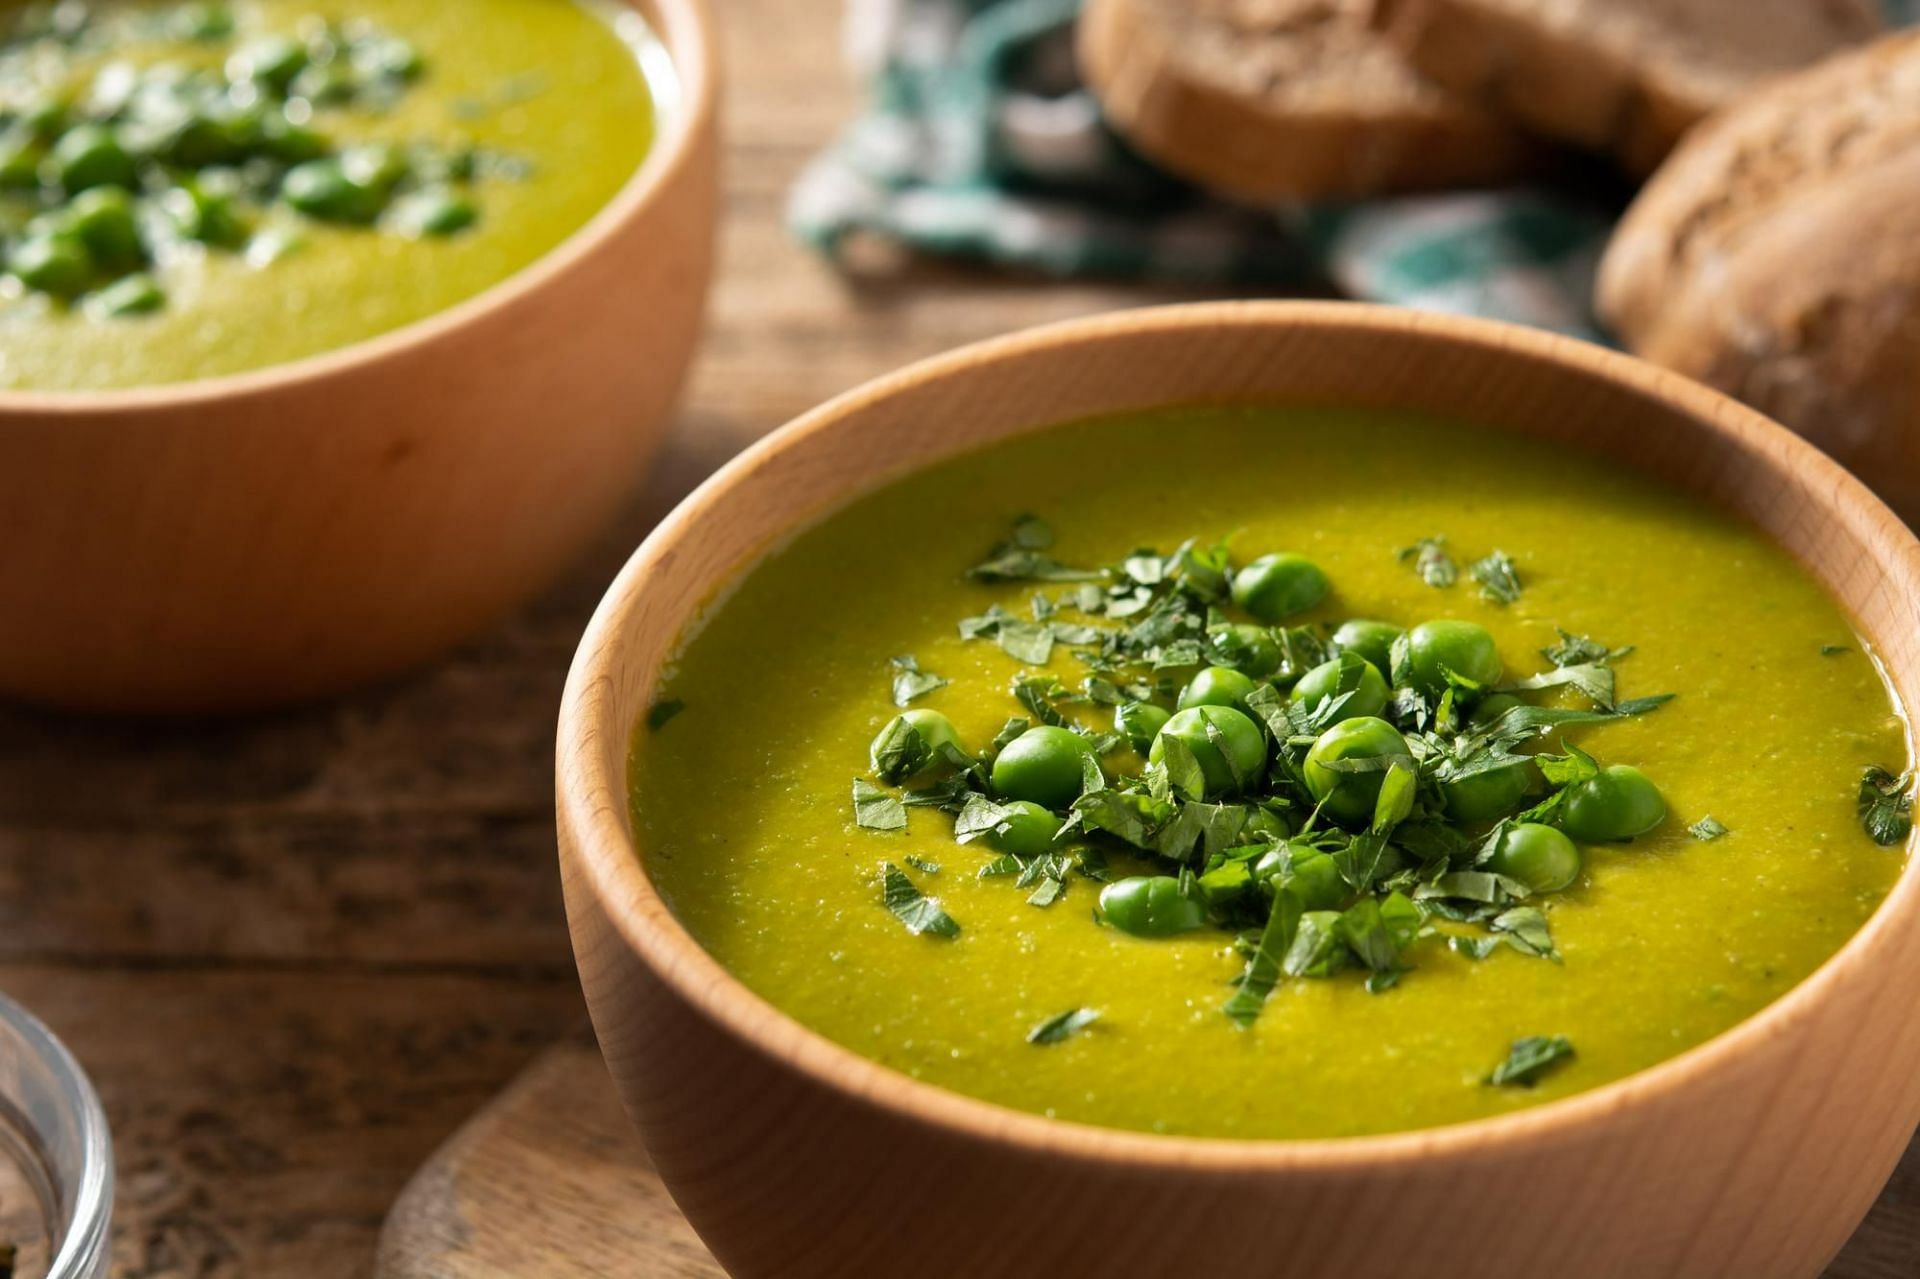 Healthy soups for weight loss (Image by chandlervid85 on Freepik)